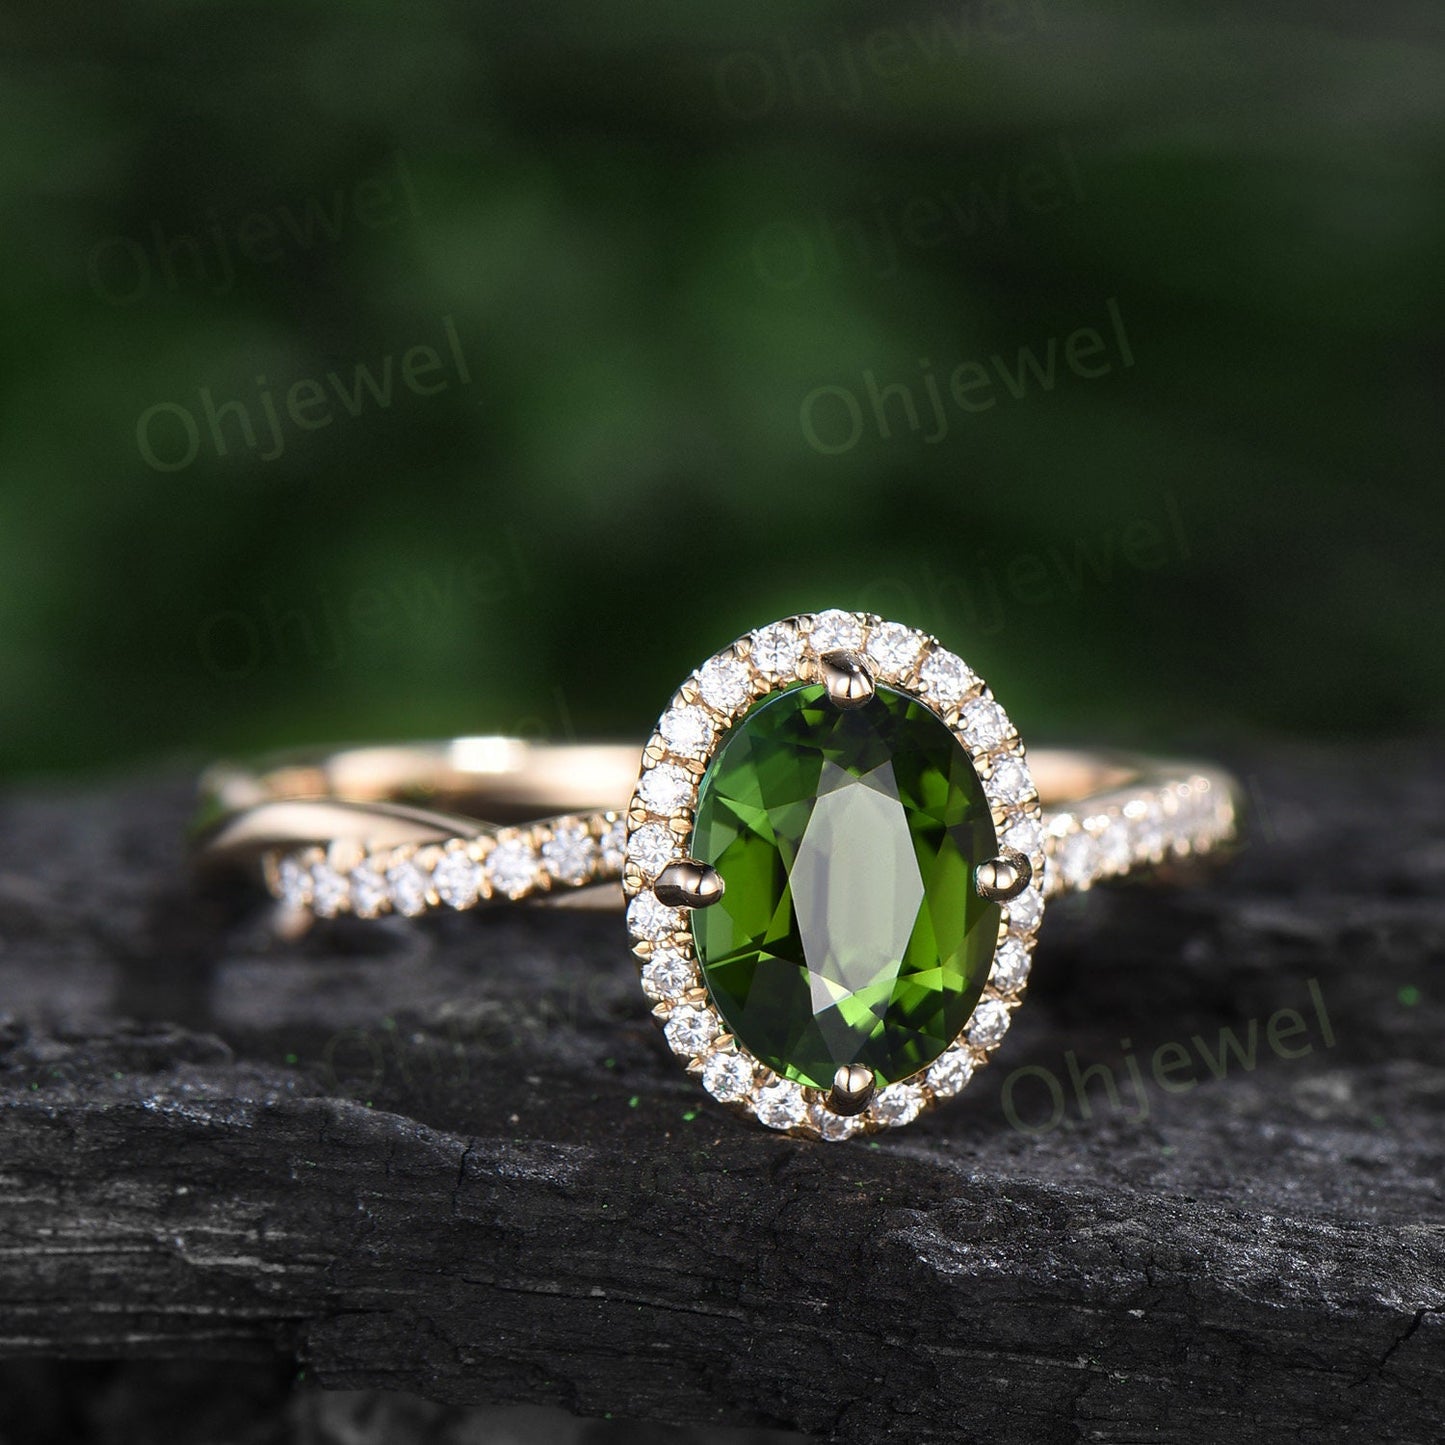 Oval green Tourmaline ring vintage unique engagement ring halo twisted diamond ring prong set fine jewelry yellow gold bridal ring women